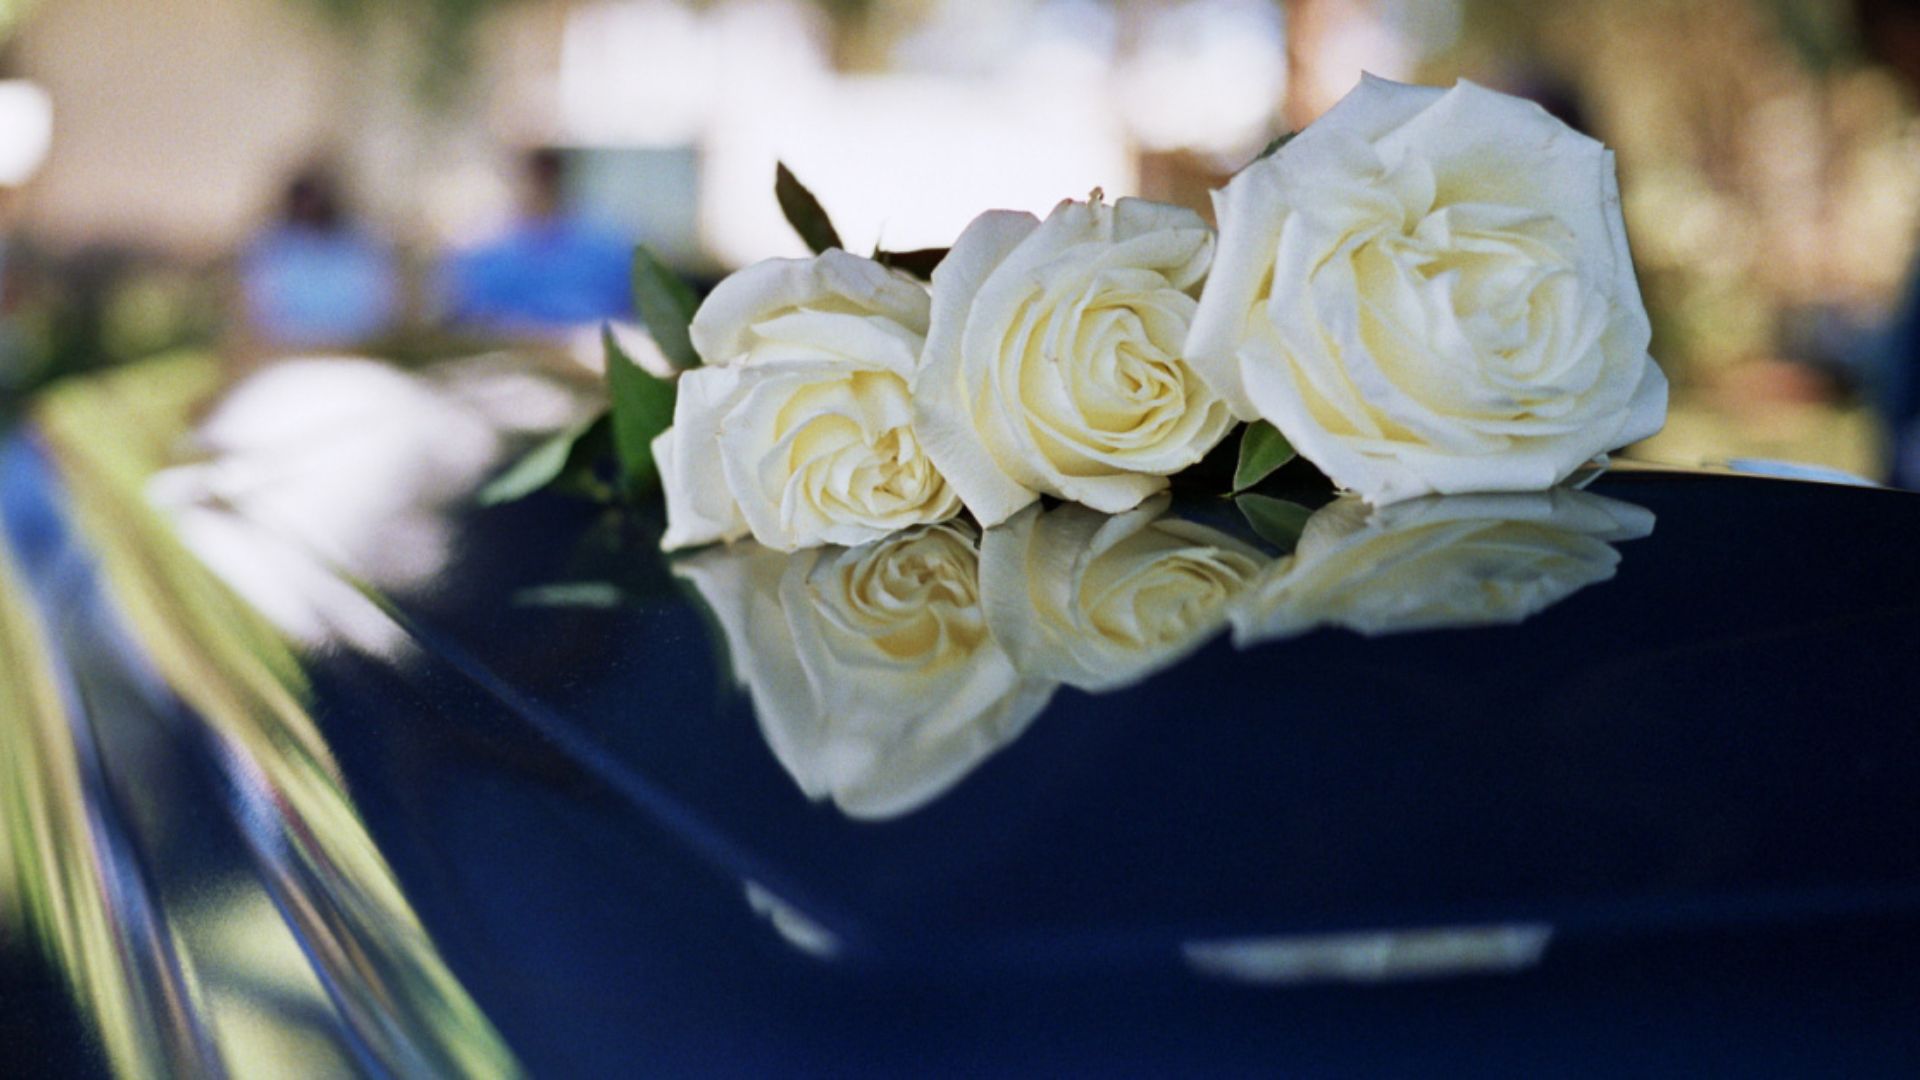 Three White Flowers on a casket